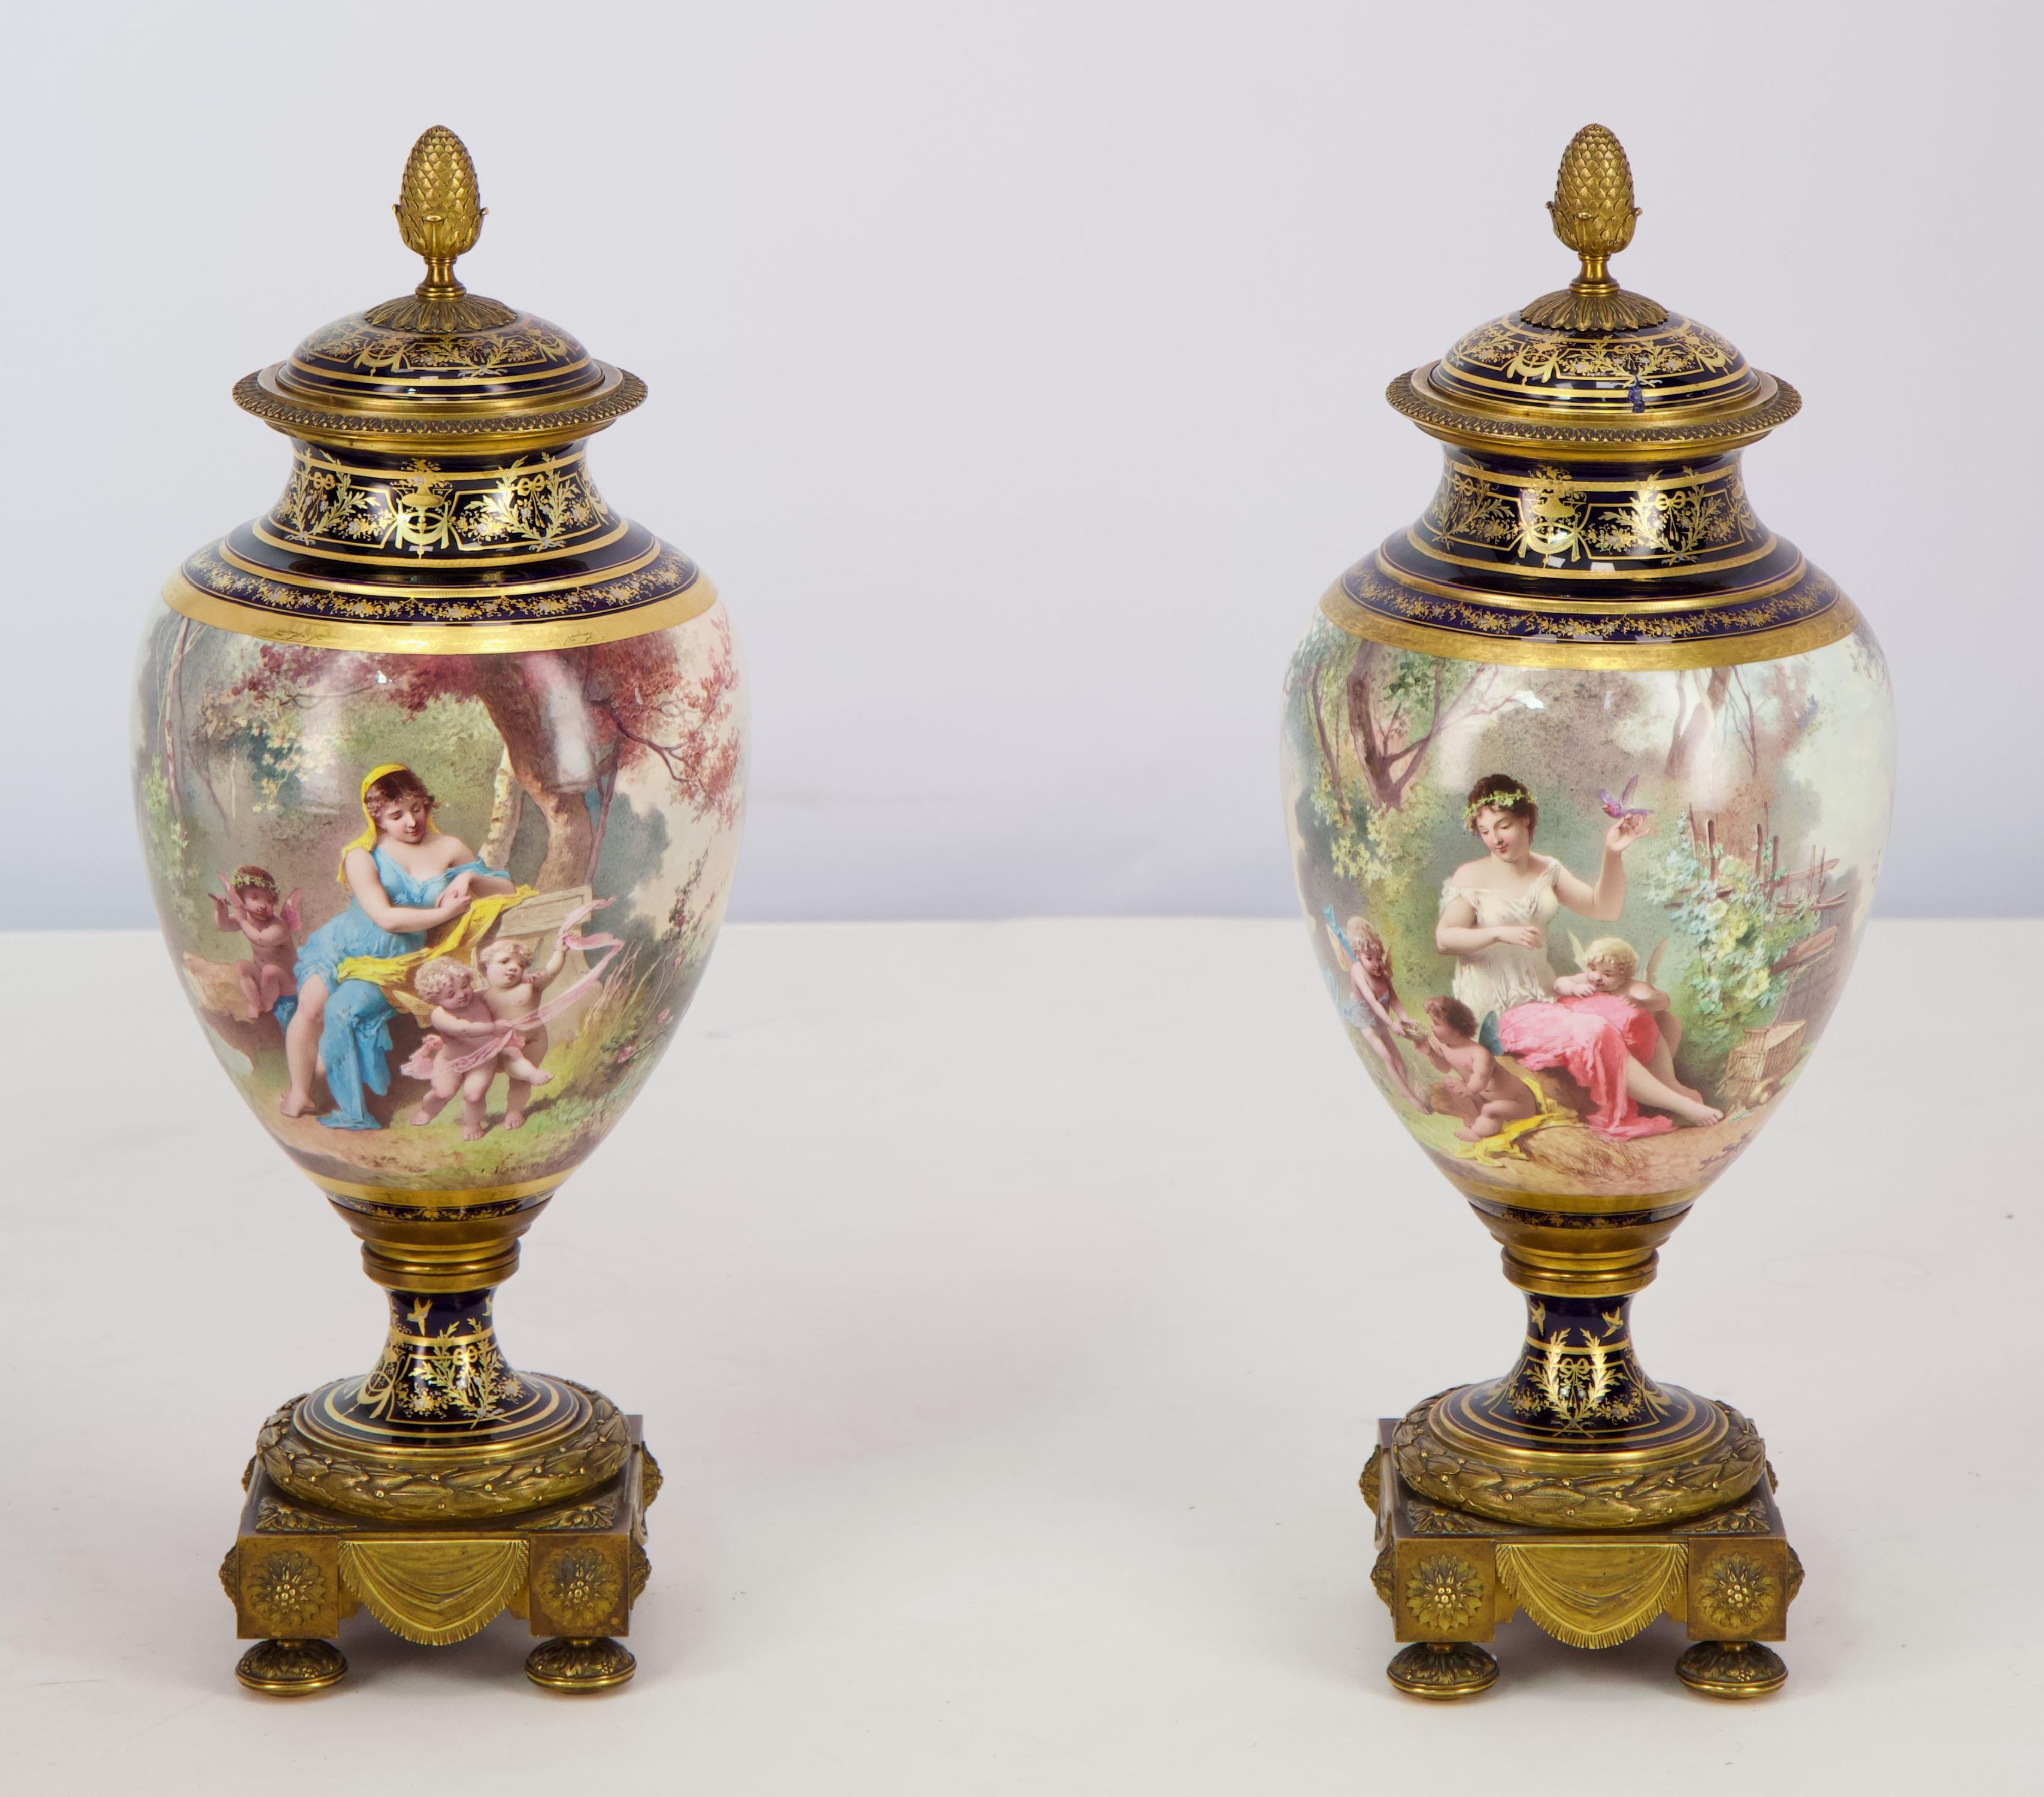 This very beautiful pair of ovoid and covered vases was made of Sèvres porcelaine and mounted in gilt bronze. The two vases depicts a painted decor by Charles Labarre ( ?-1906) in the 1890's.

Famous porcelain painter, active in the 1890's, Charles